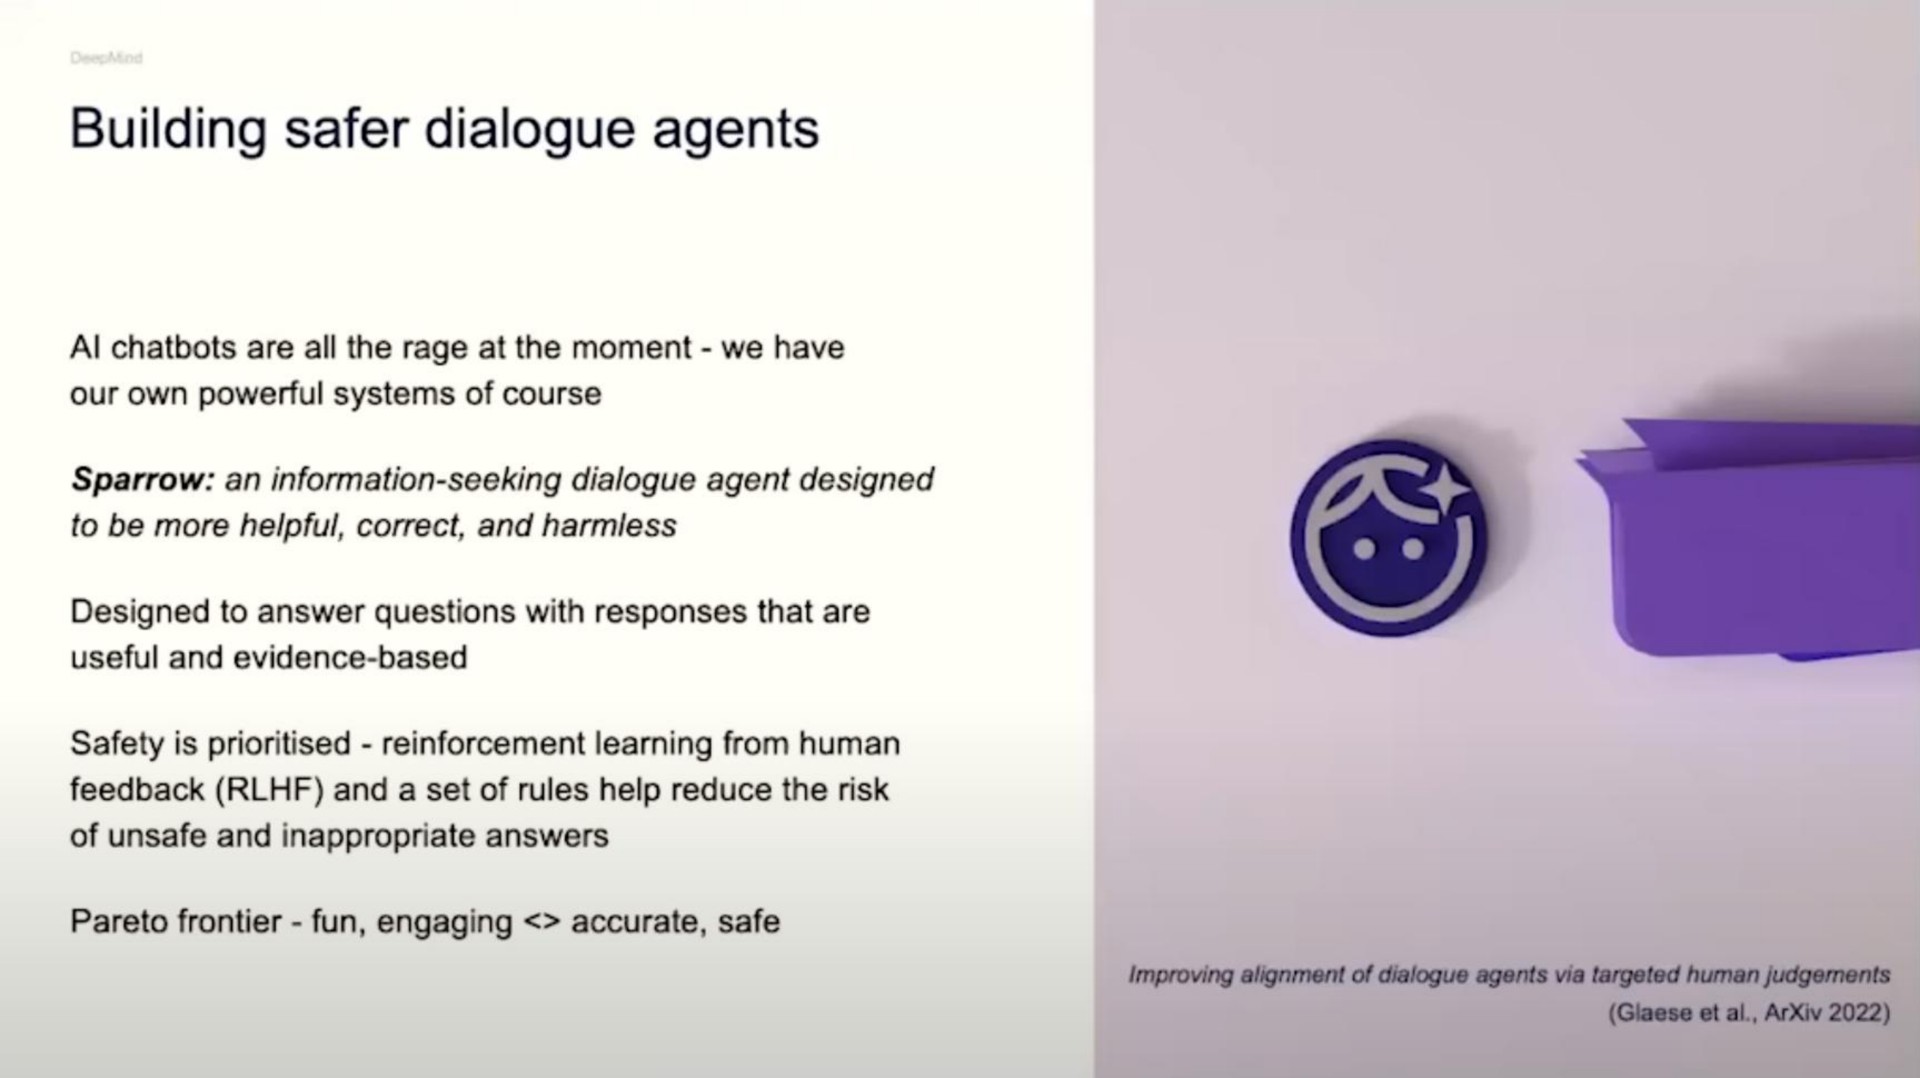 building dialogue agents are all the rage at the moment we have our own powerful systems of course sparrow an information seeking dialogue agent designed to be more helpful correct and designed to answer questions with responses that are useful and evidence based safety is reinforcement learning from human feedback and a set of rules help reduce the risk of unsafe and inappropriate answers frontier fun engaging accurate safe improving alignment of dialogue agents via targeted human | DeepMind